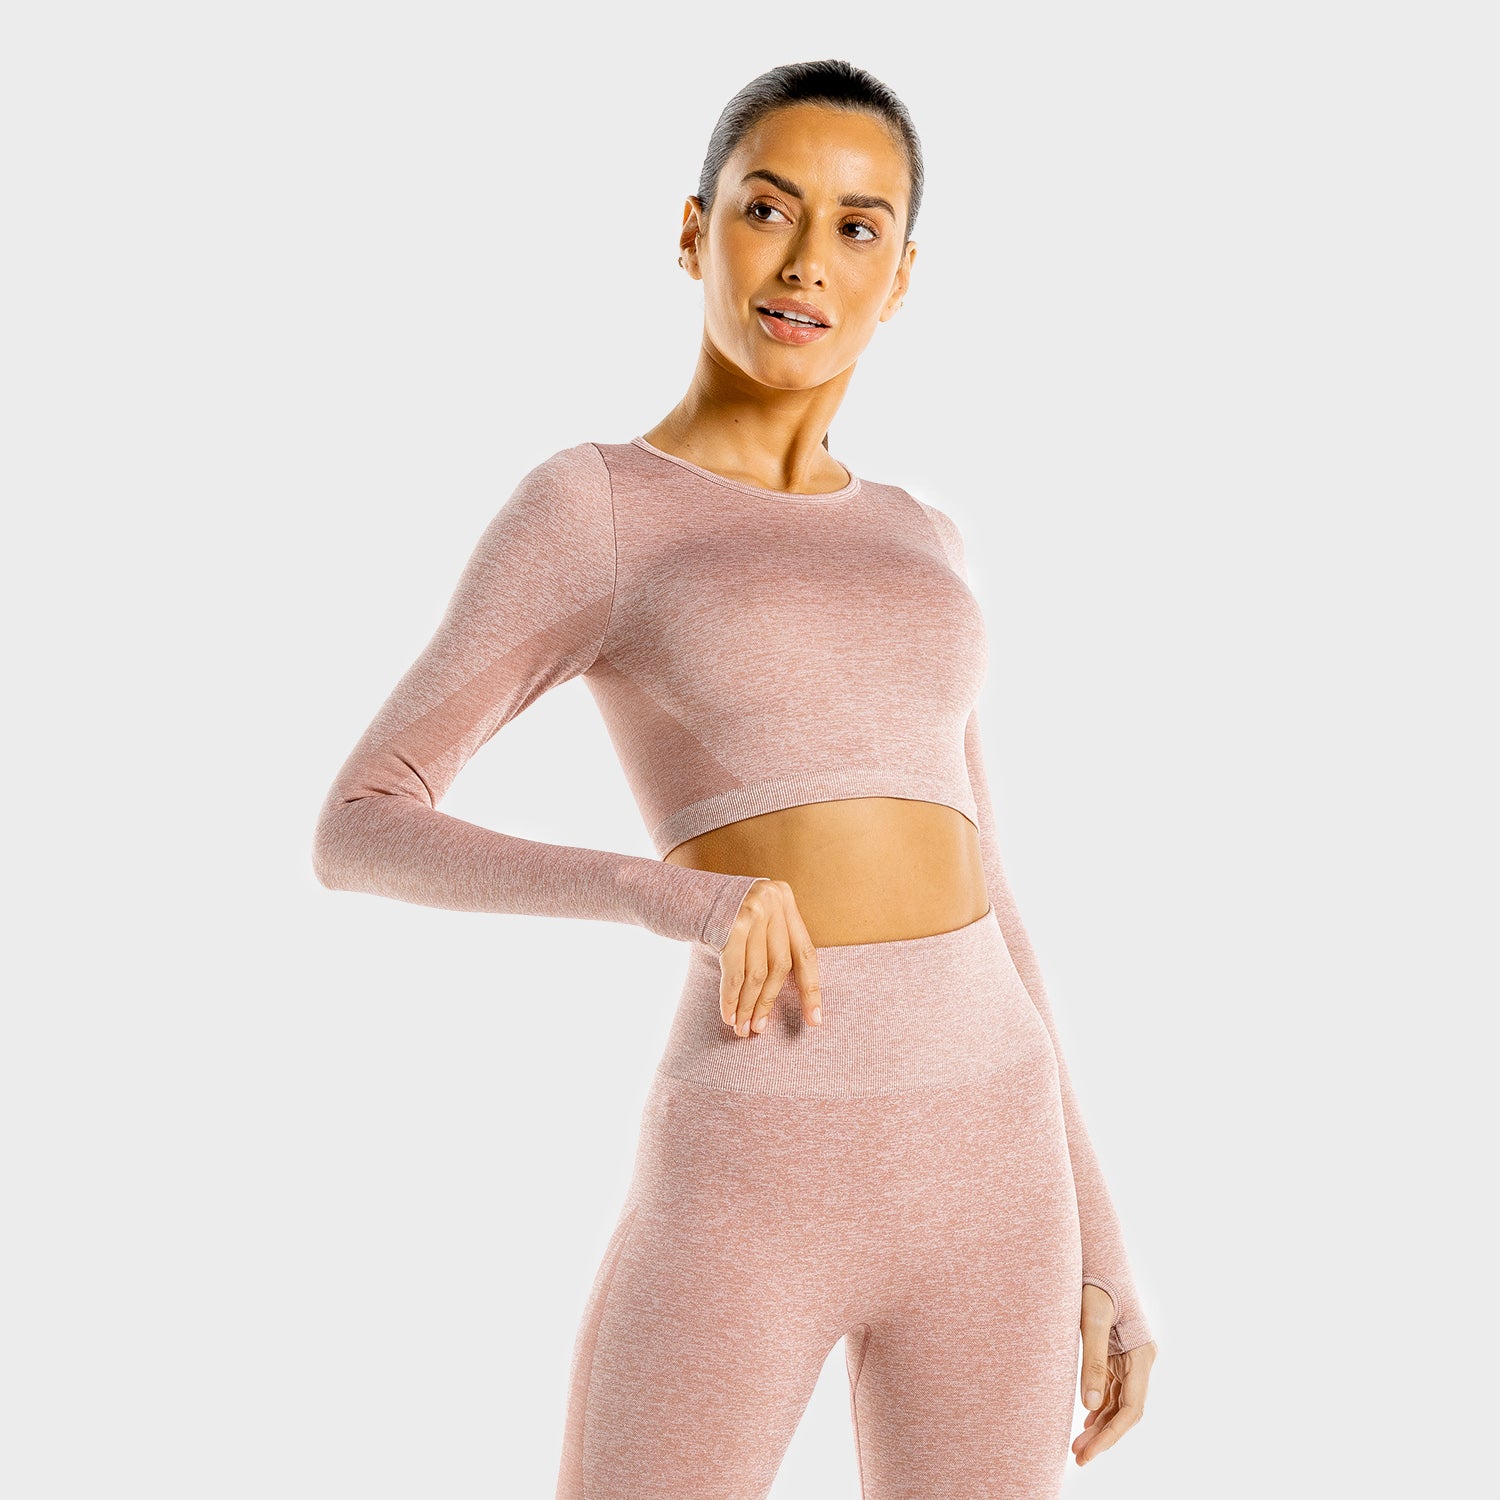 squatwolf-gym-crop-tops-for-women-marl-seamless-crop-top-rose-gold-workout-clothes